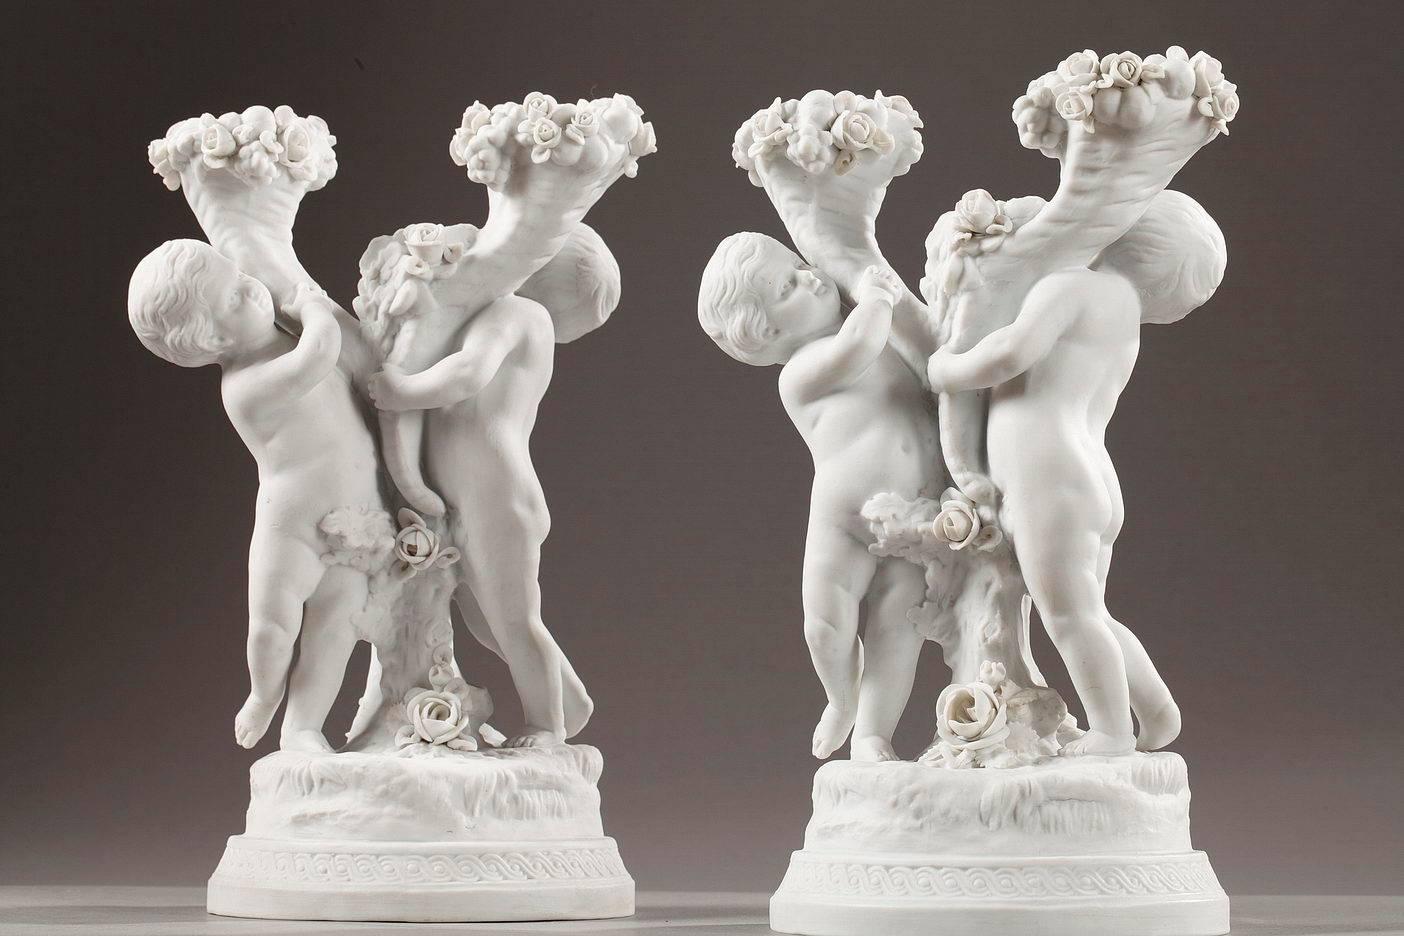 Pair of candelabras with two branches in biscuit porcelain. Two young putti lean against a tree trunk decorated with roses while holding up cornucopias that contain the candle sockets. The rims of the cornucopias are embellished with fruits and